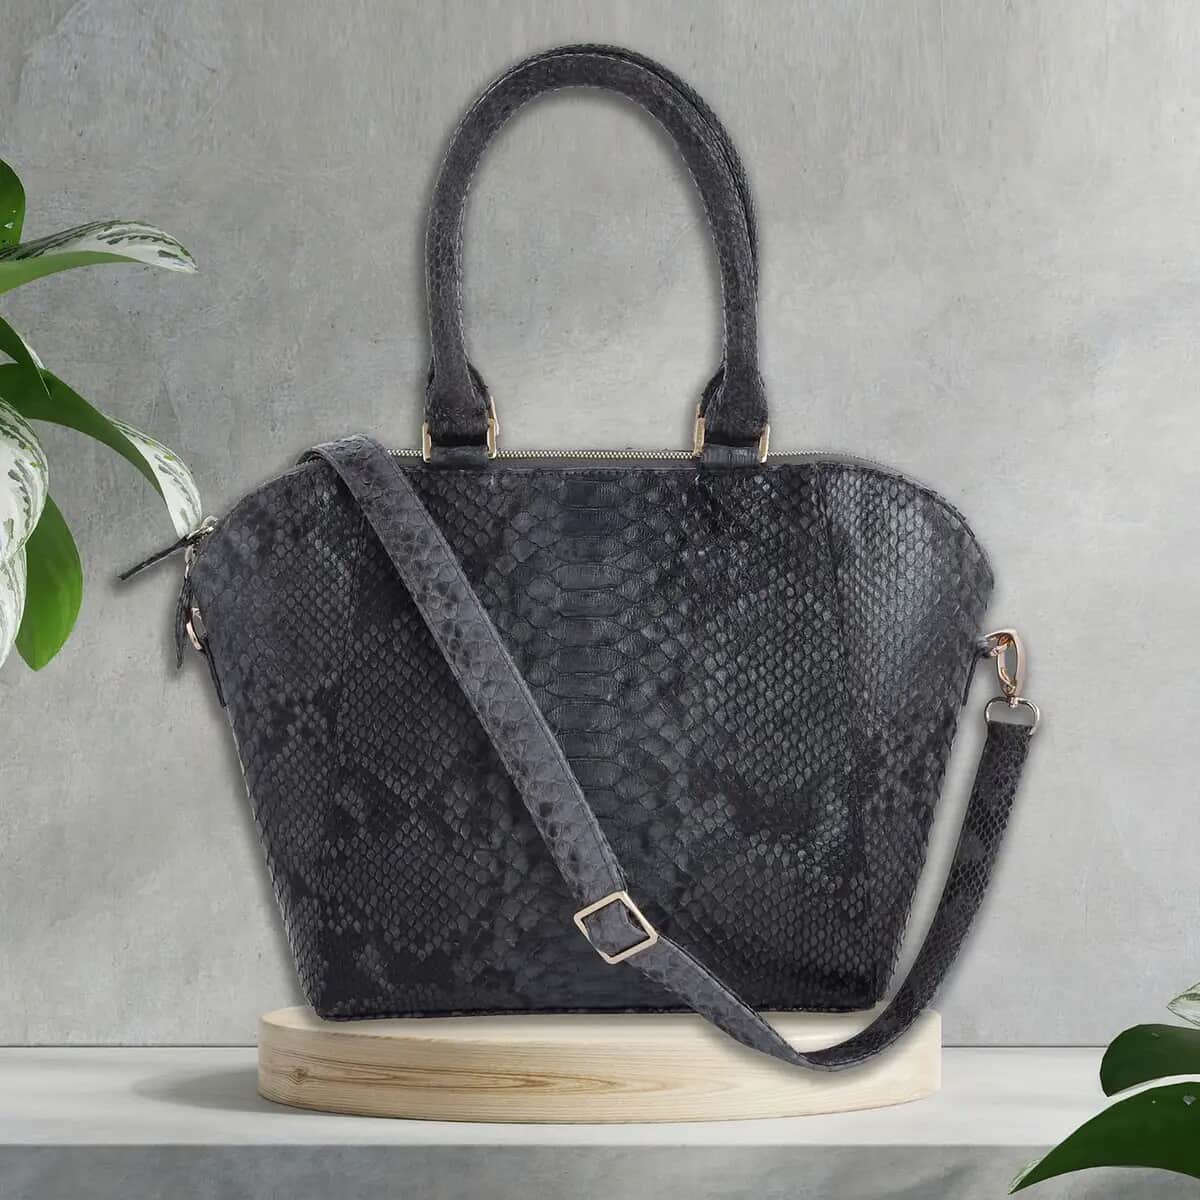 The Grand Pelle Handcrafted Black Genuine Python Leather Tote Bag for Women with Long Strap 